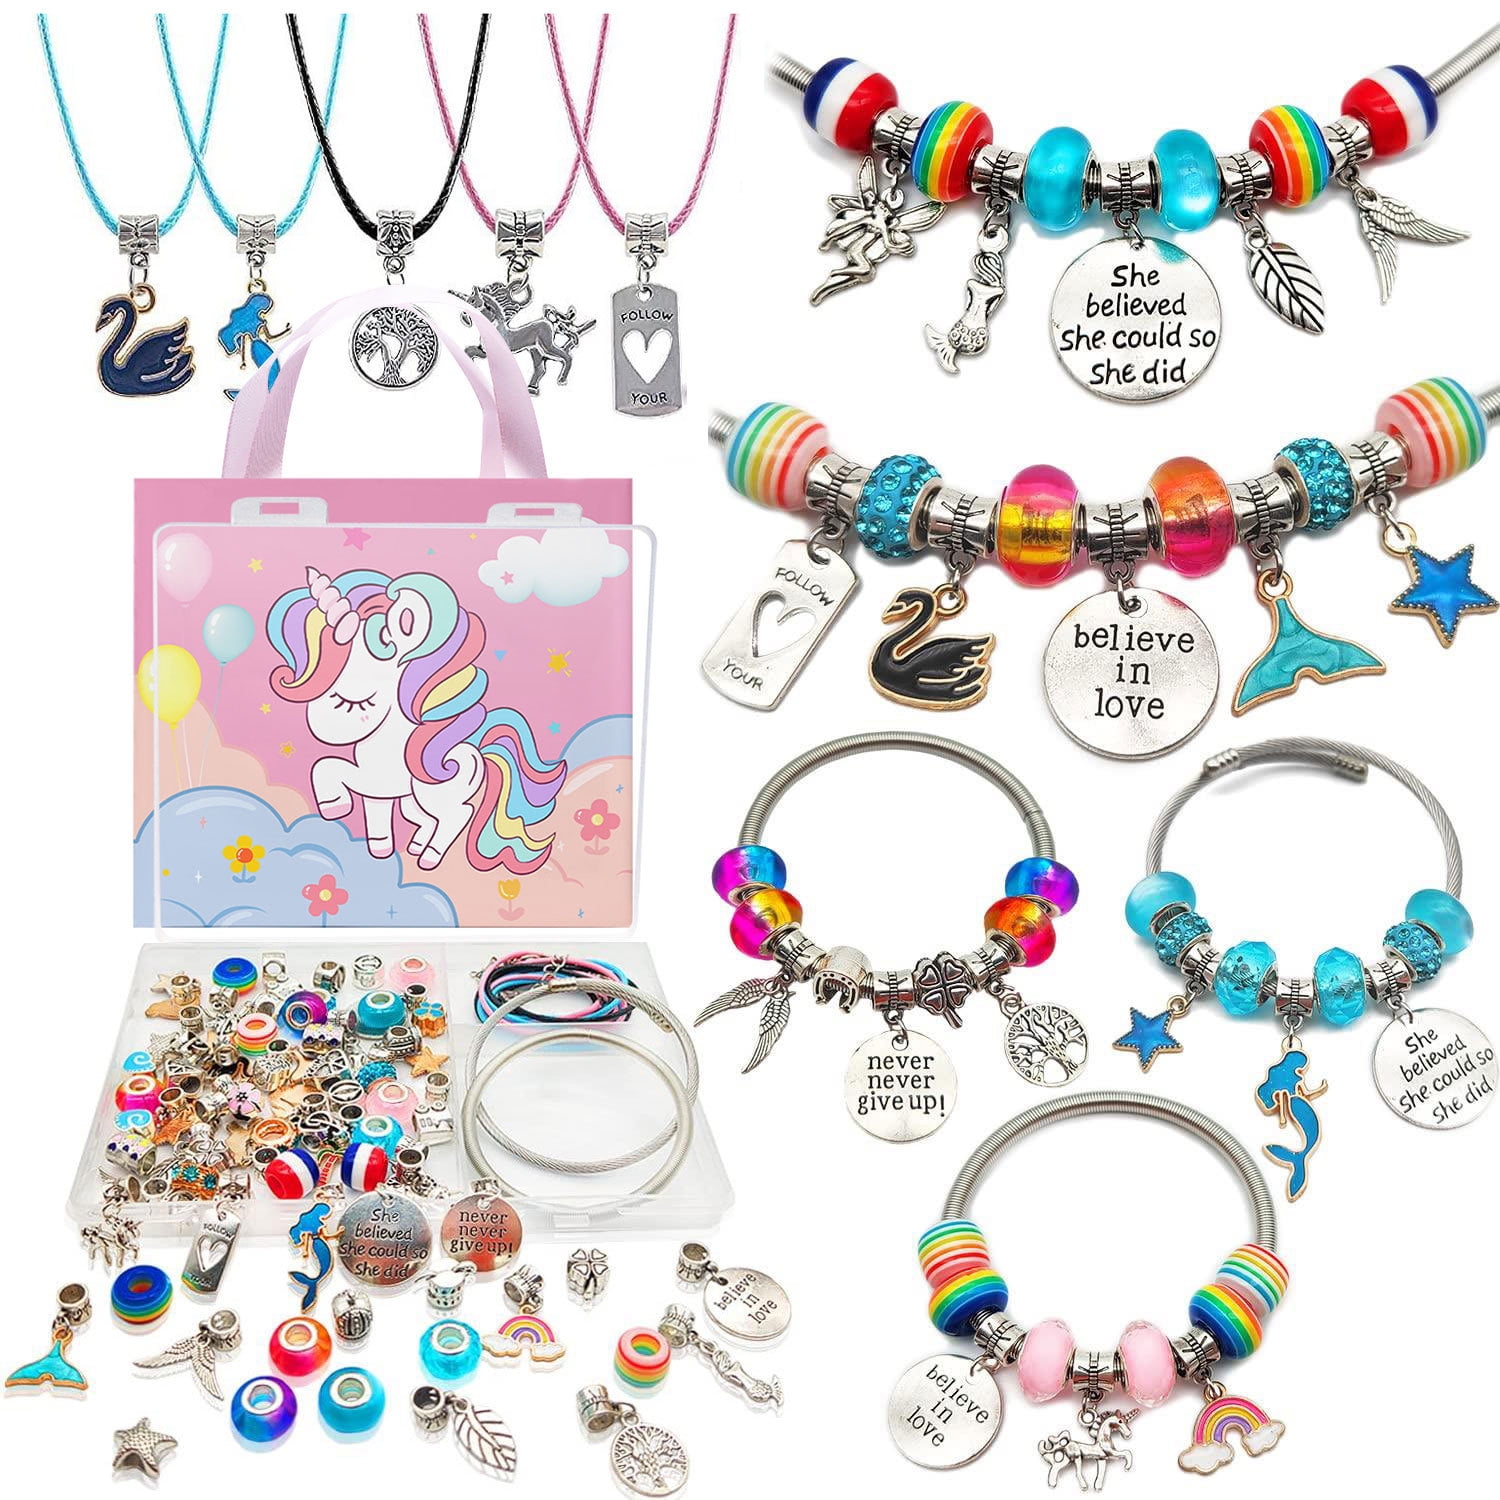  Jewelry Making Kit for Girls 8-12,Bracelet Making Kit,DIY Red  Beads Pendant Craft Supplies for Kids,Birthday Gifts for 5 6 7 8 9 10 11 12  Year Old Girl,Unicorns Mermaid Rainbow Gift for Teen…